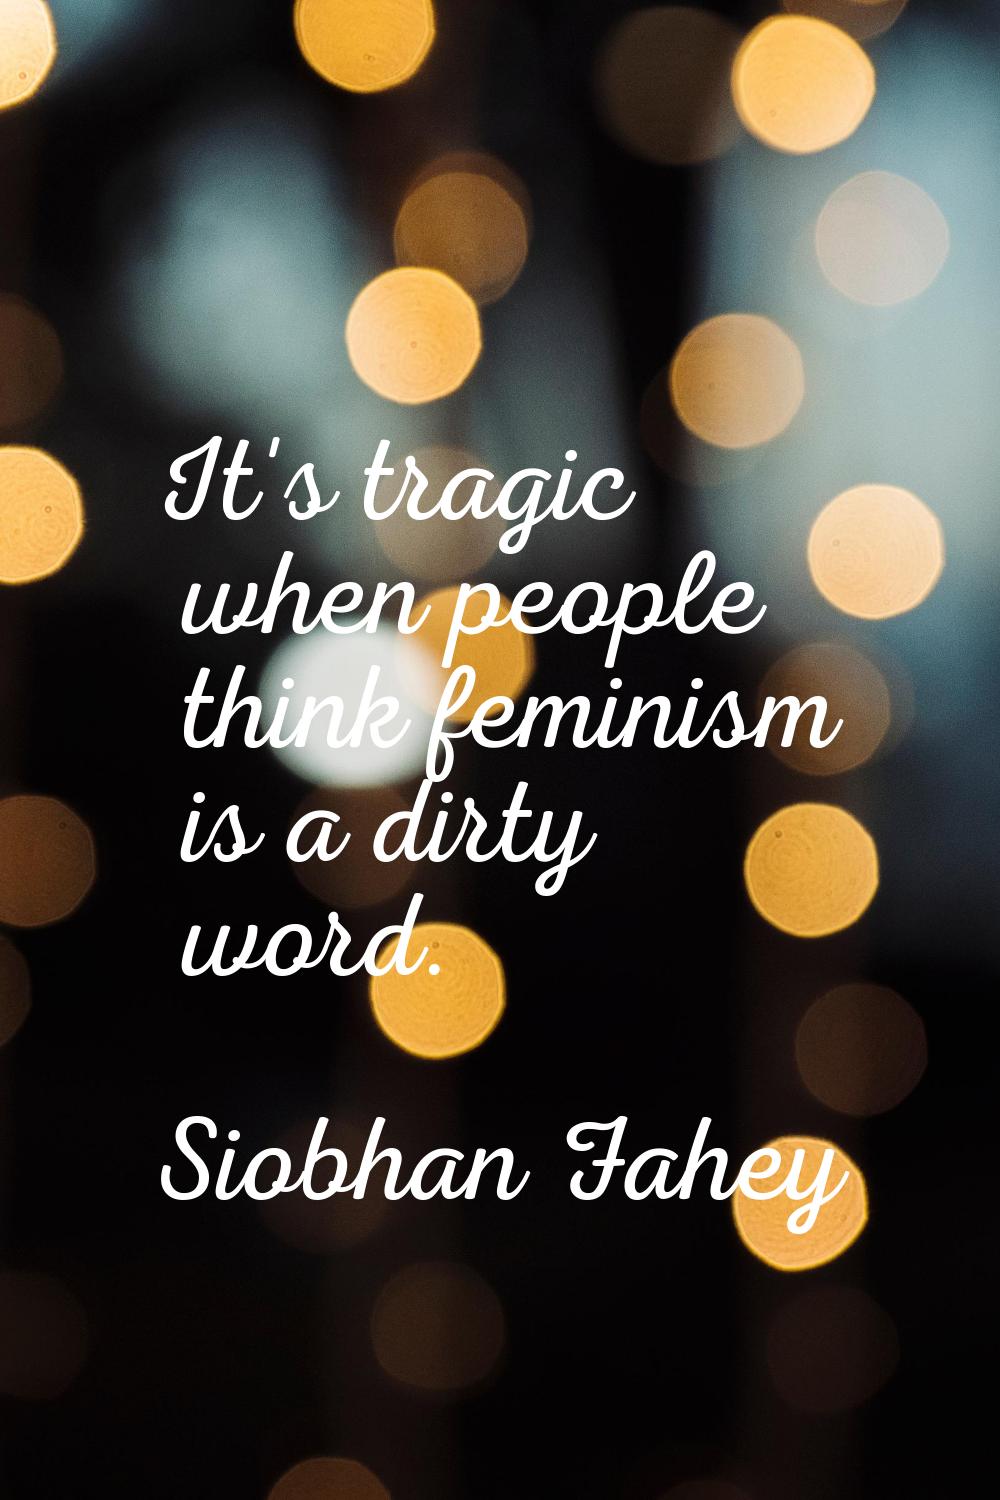 It's tragic when people think feminism is a dirty word.